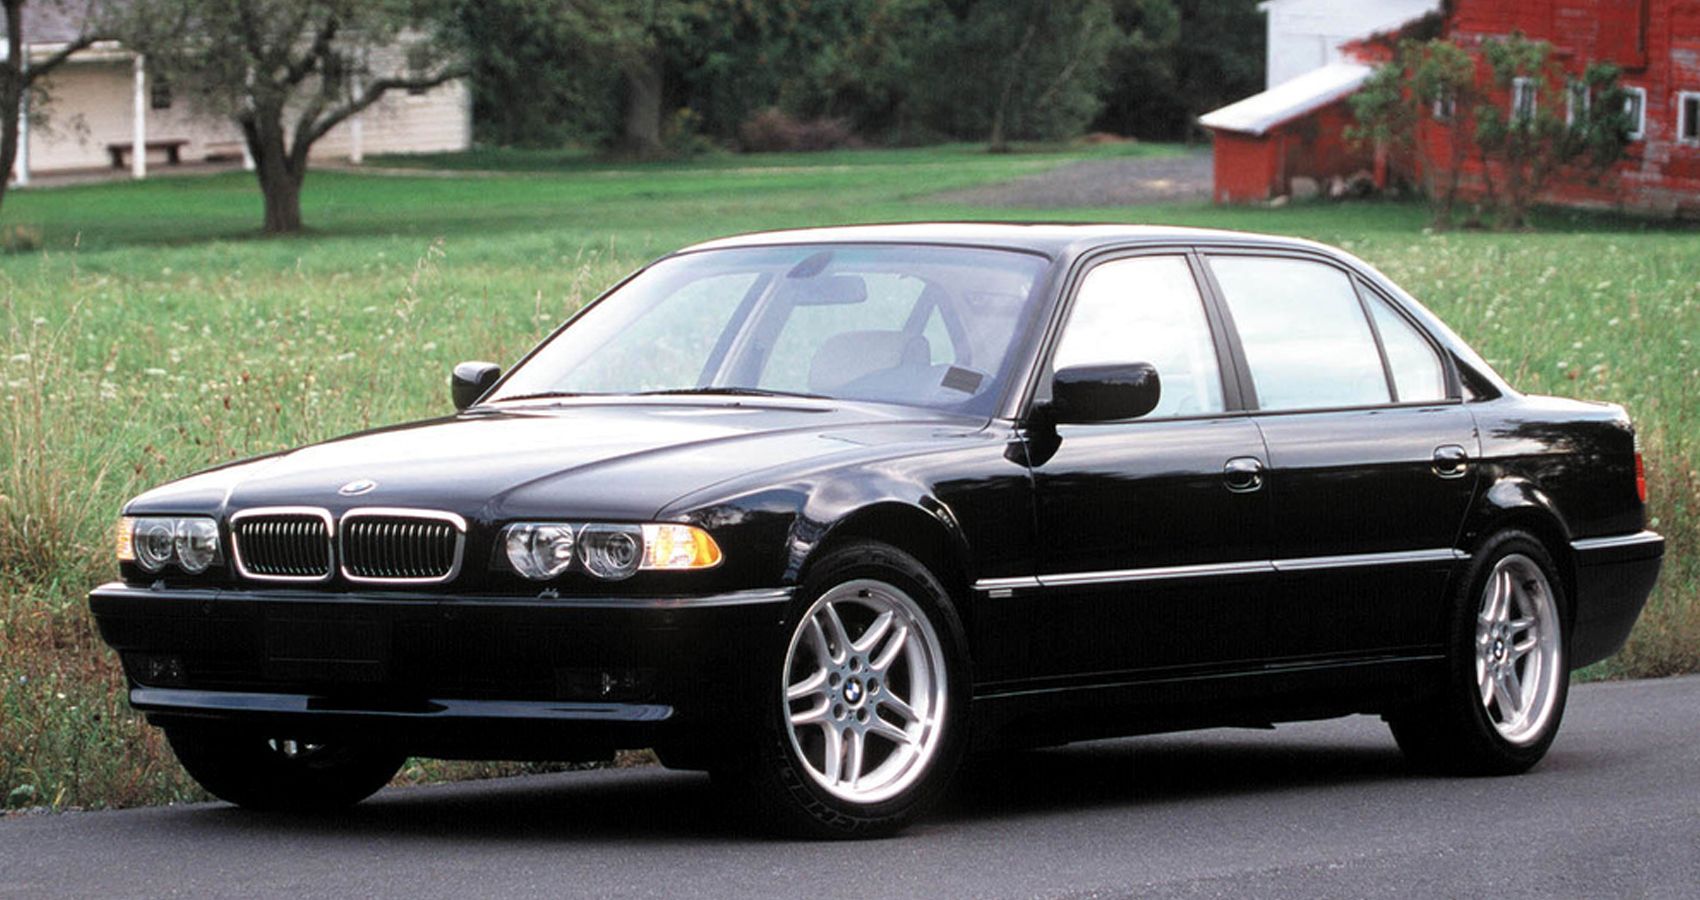 Front 3/4 view of a black E38 7 Series